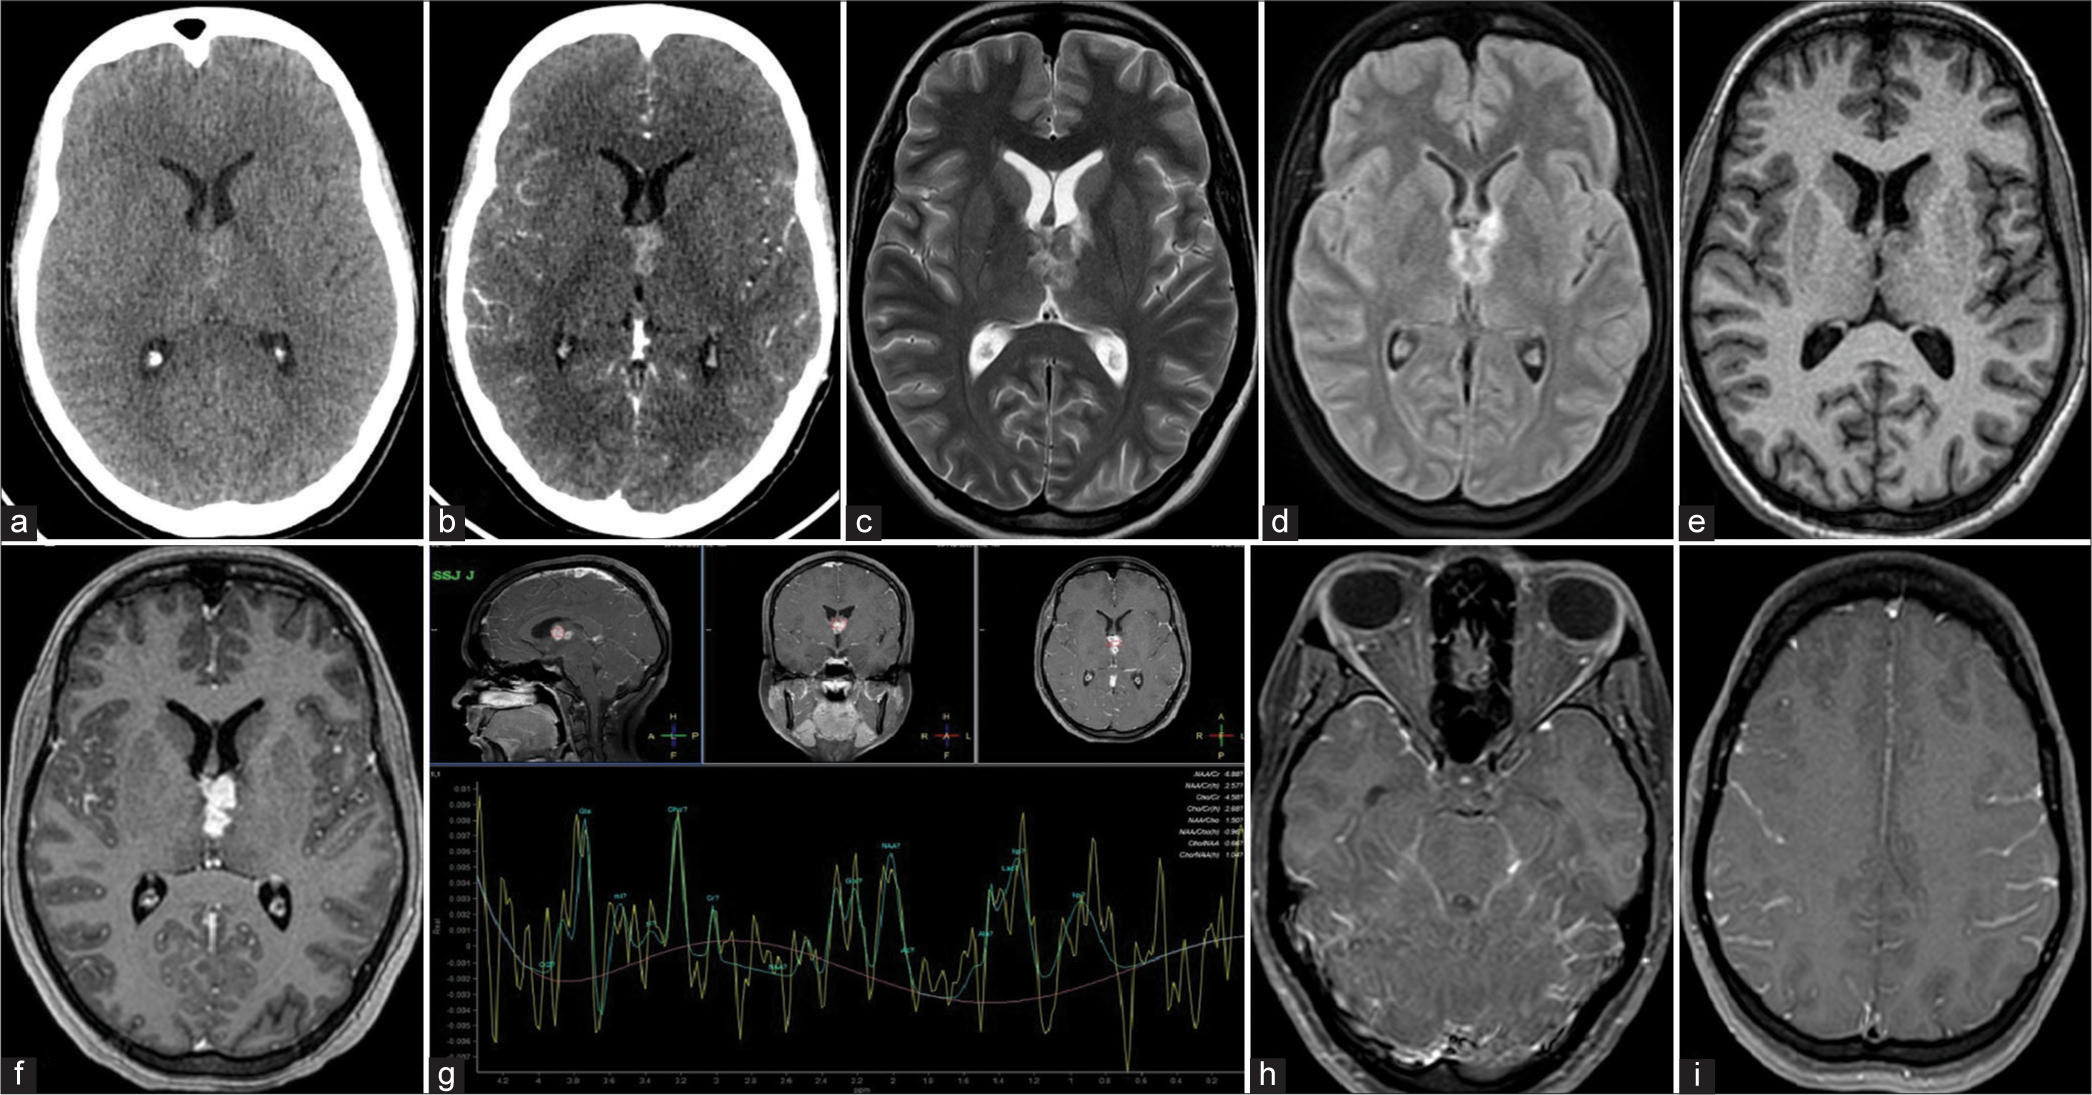 Two rare central nervous system manifestations of a common disease